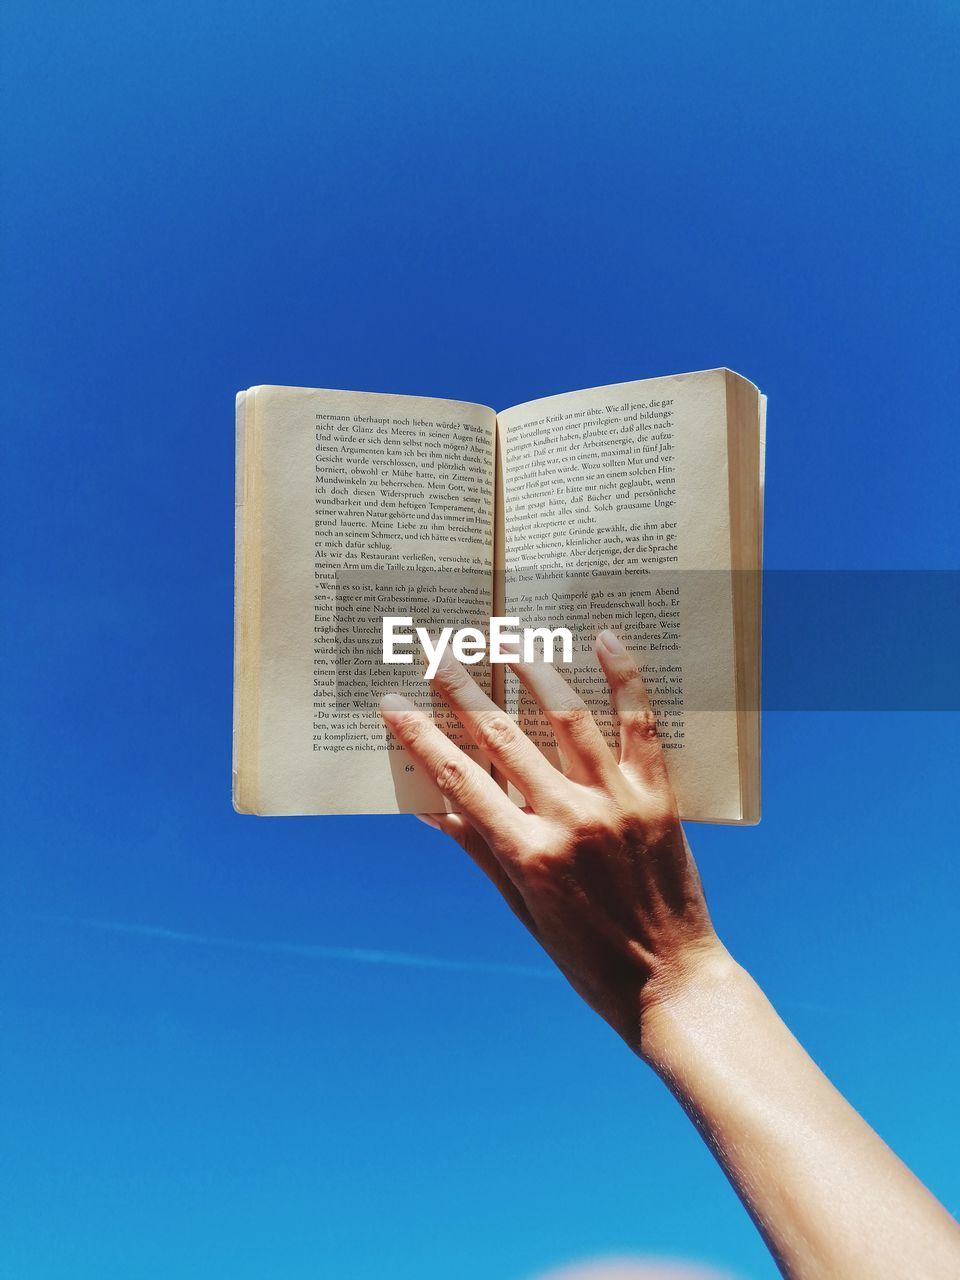 Cropped hand of person holding book against blue background